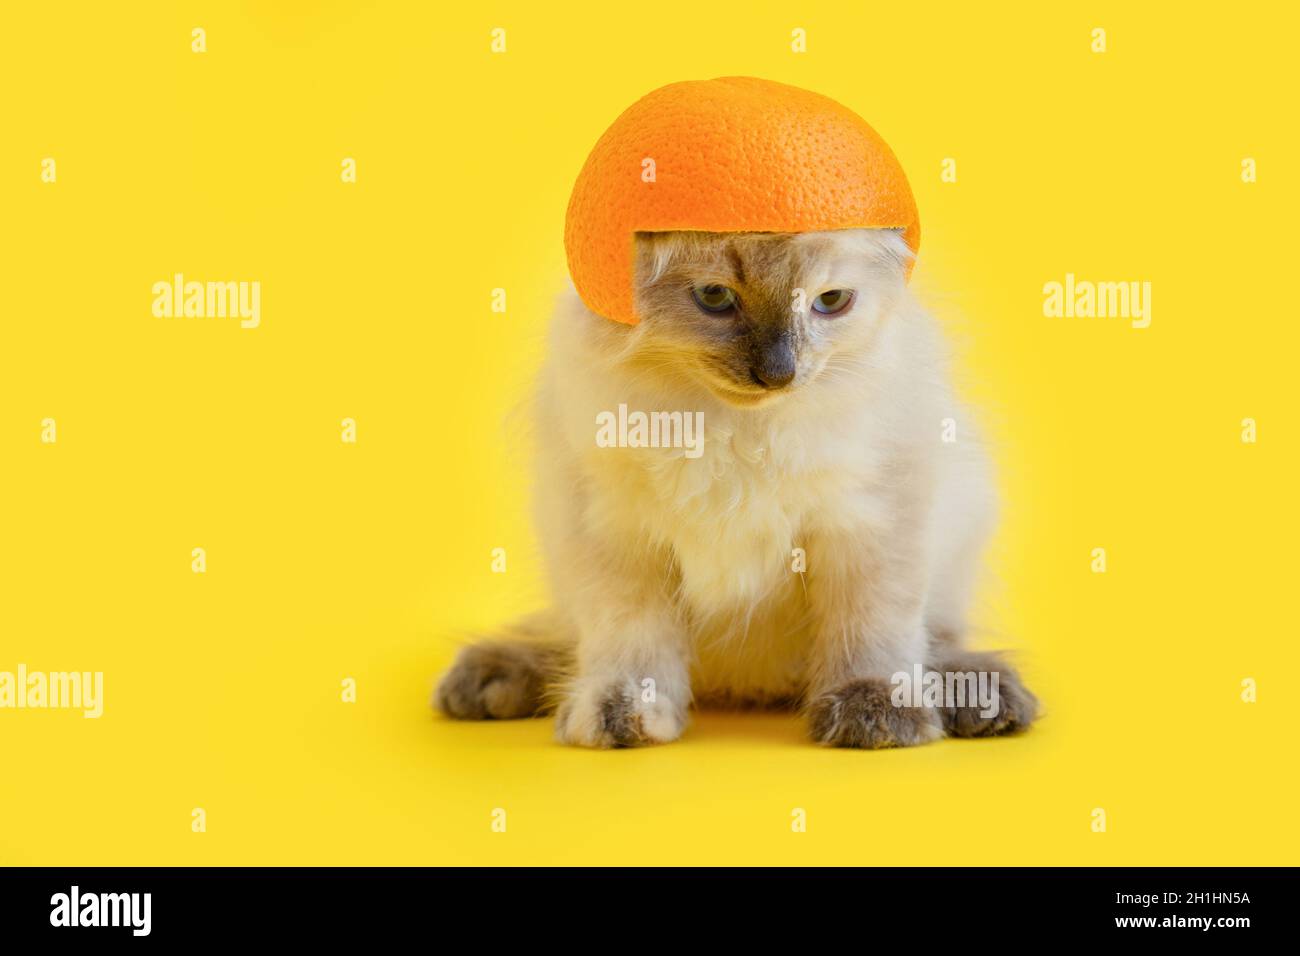 Fluffy kitten white cat In helmet made of orange Isolated on color Yellow background with copy space. Creative concept funny Domestic cat pet Animal Stock Photo